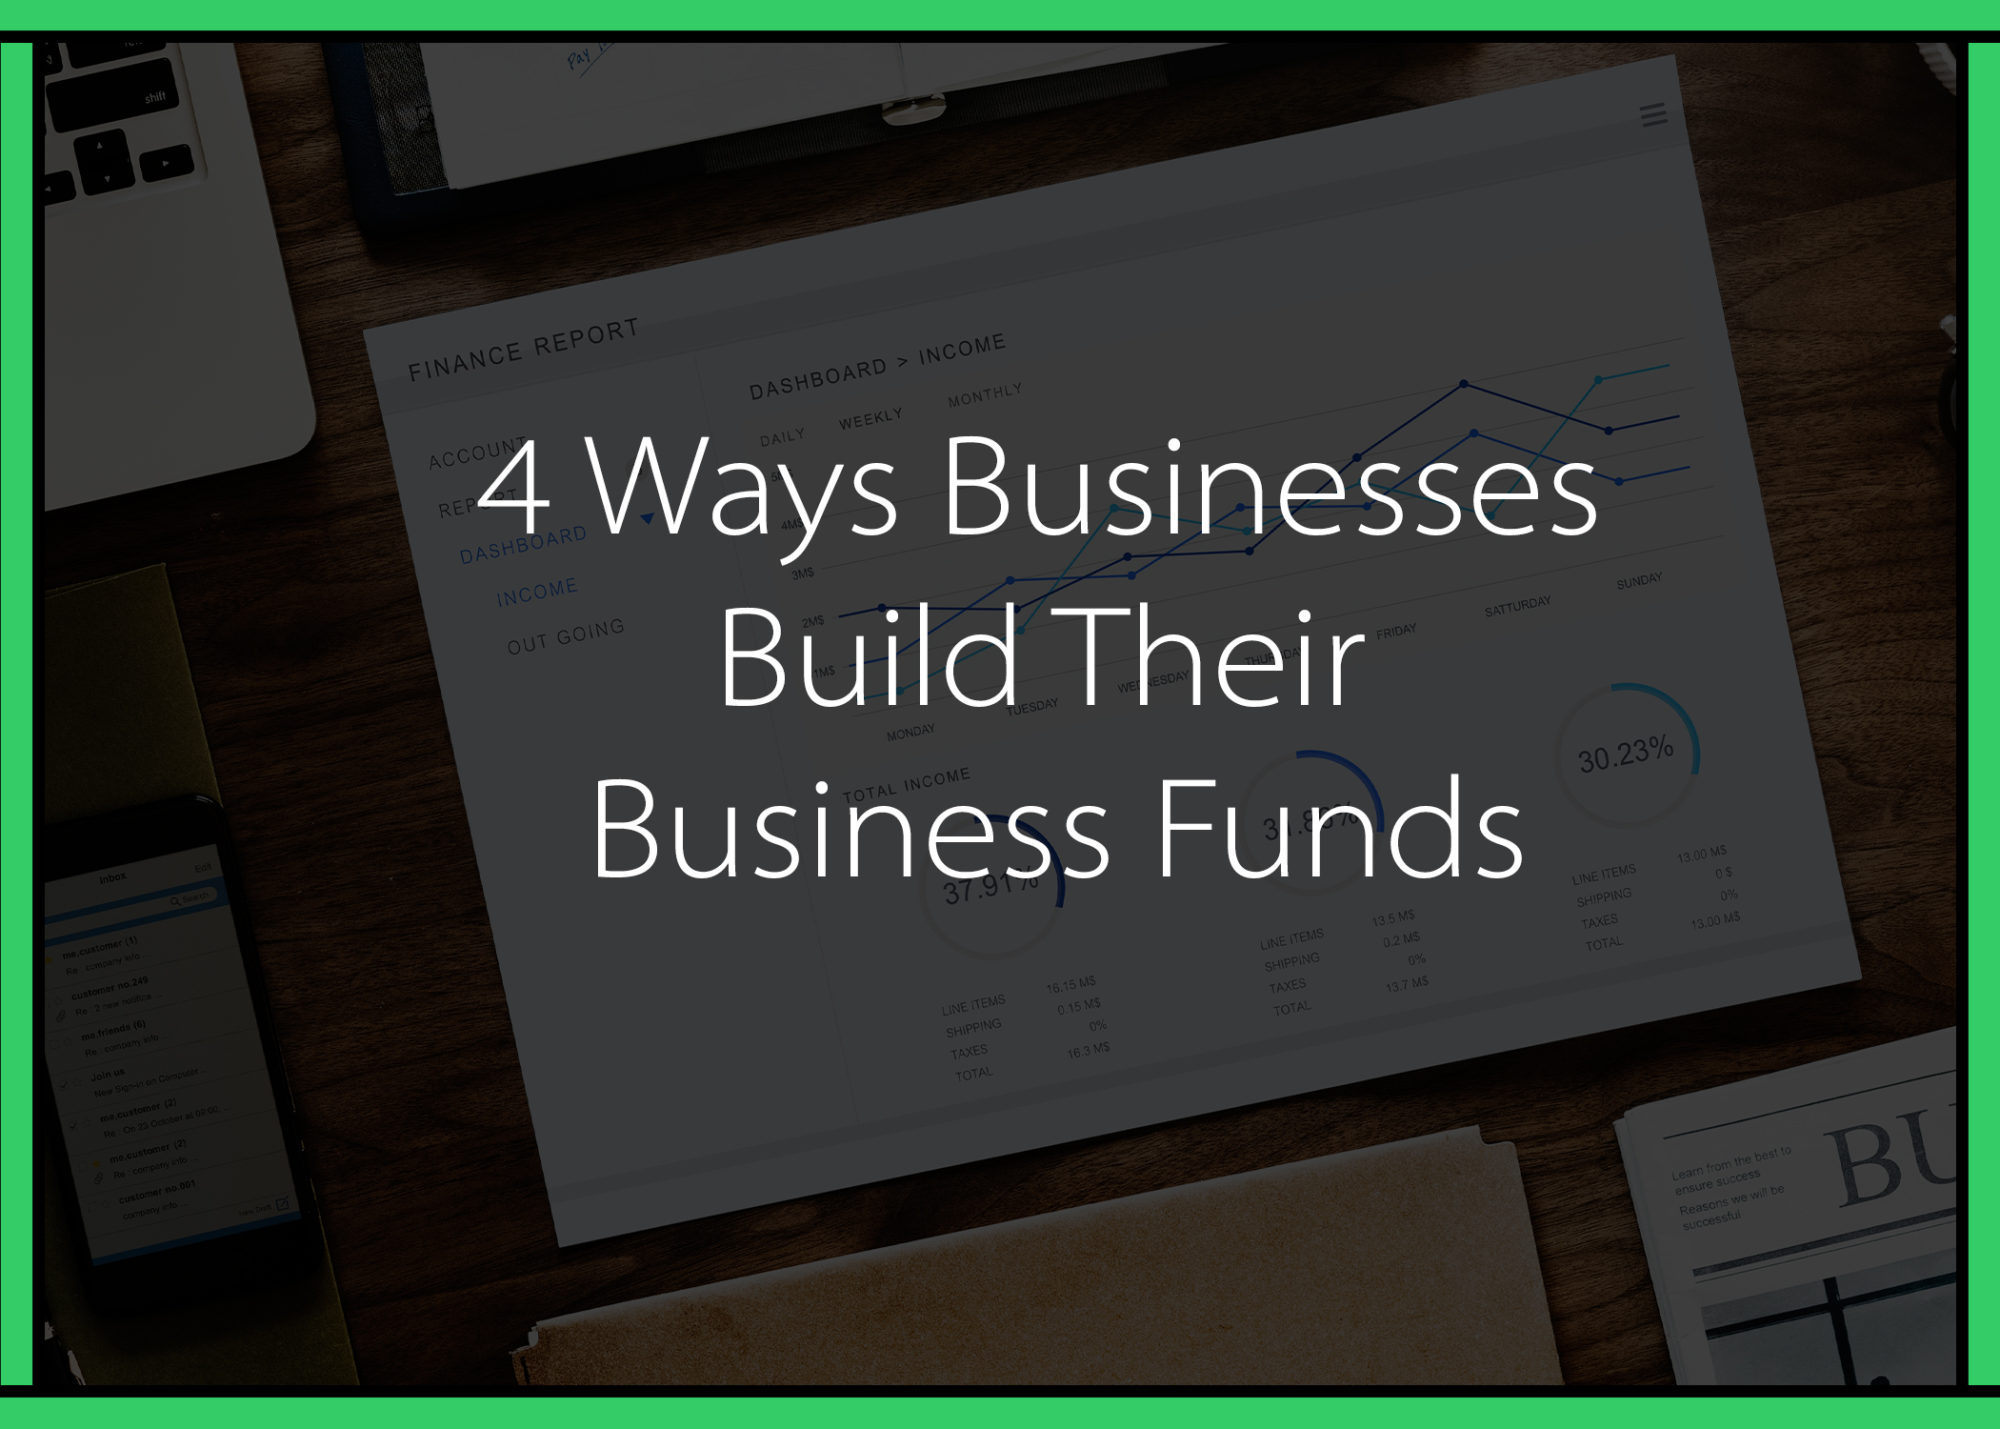 4 Ways Businesses Build Their Business Funds